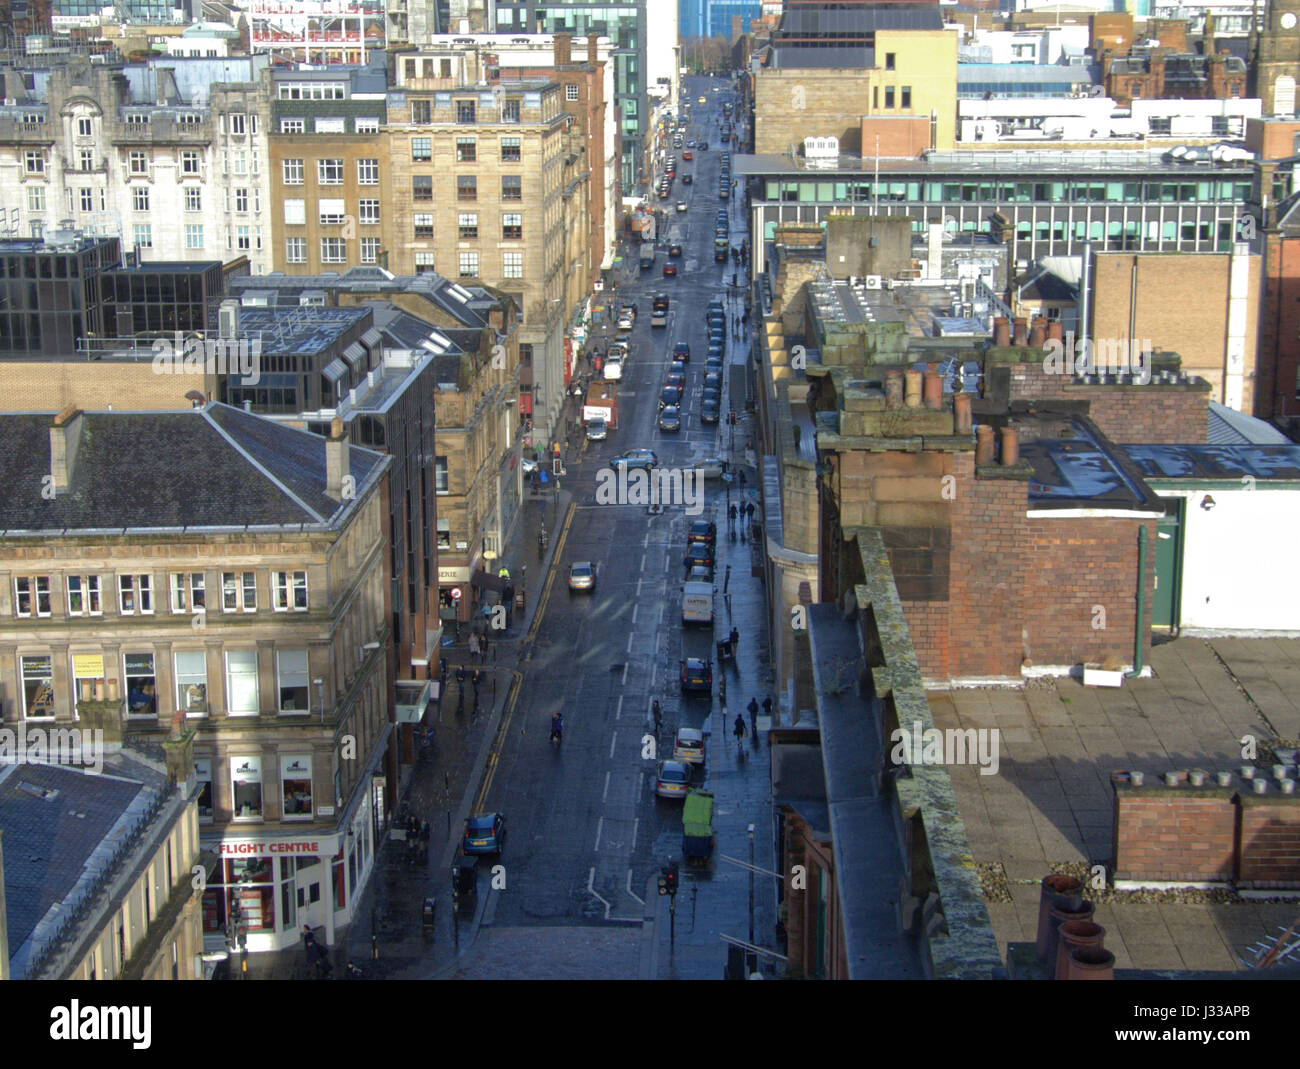 Mitchel Street Glasgow high viewpoint looking north Stock Photo